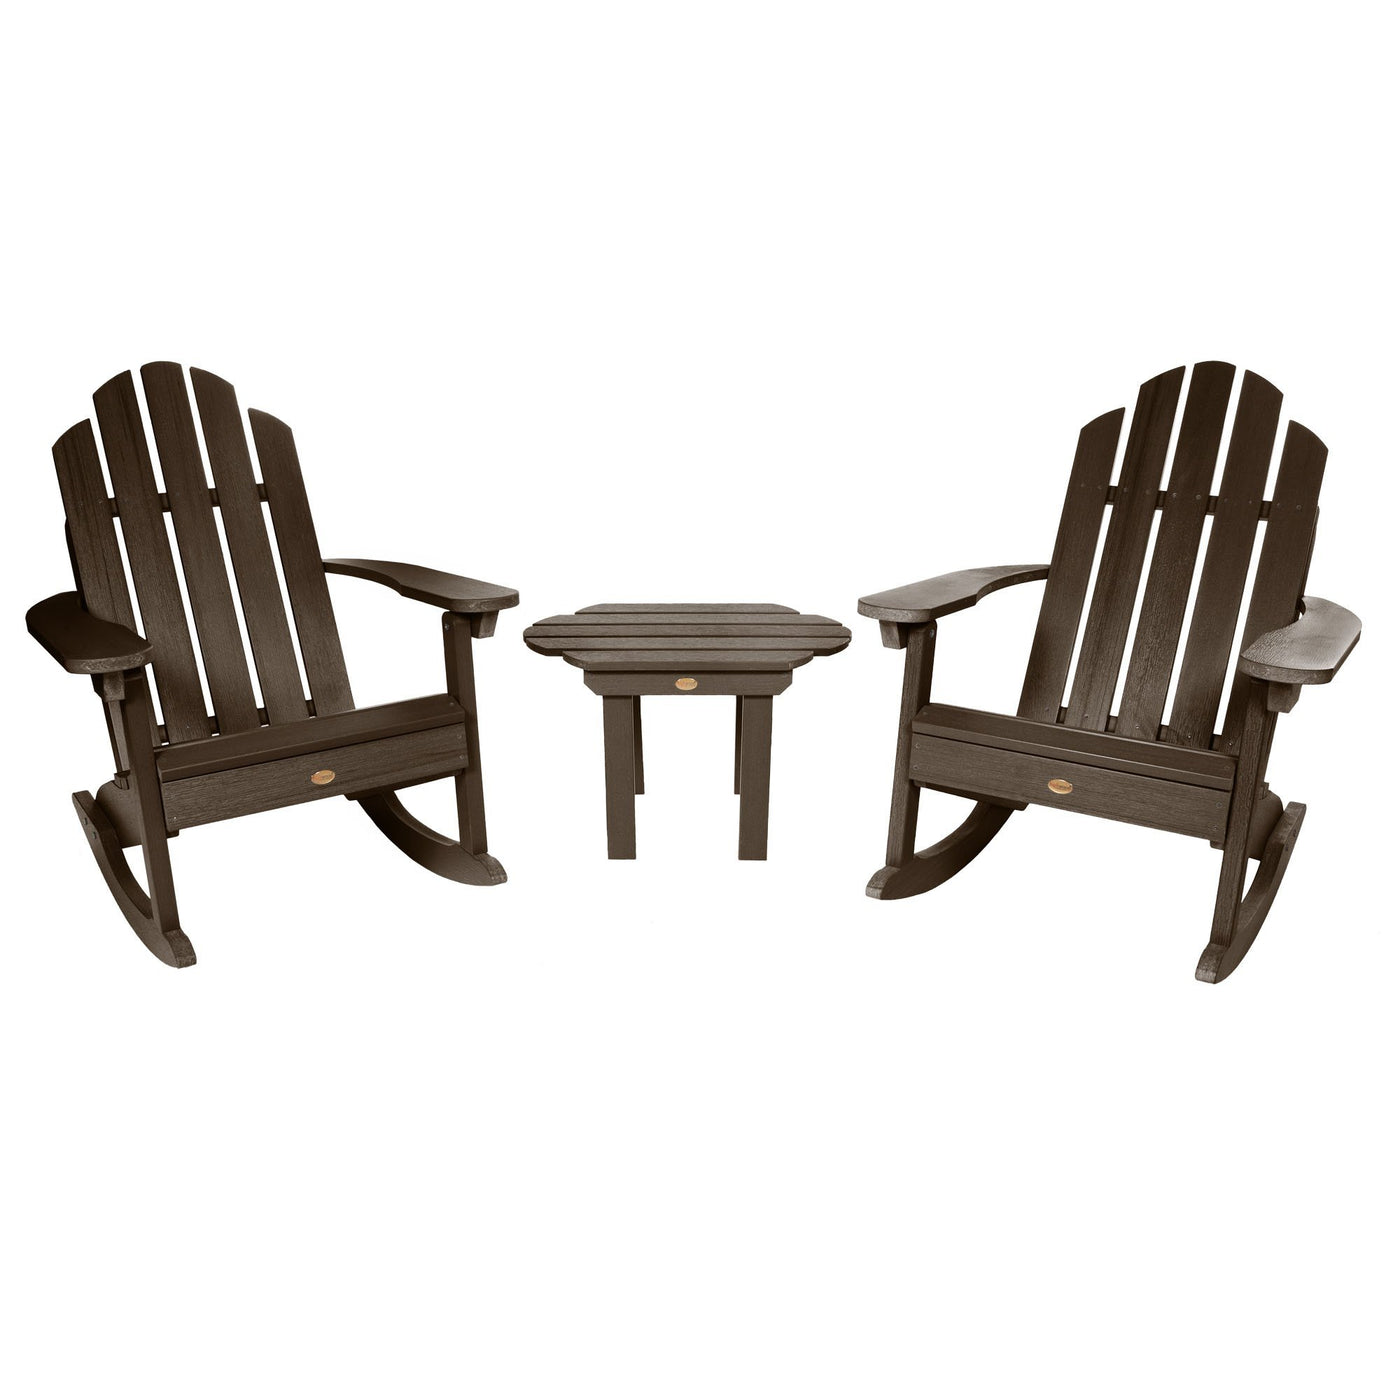 Classic Westport Rocking Chair and Table Set Highwood USA Weathered Acorn 